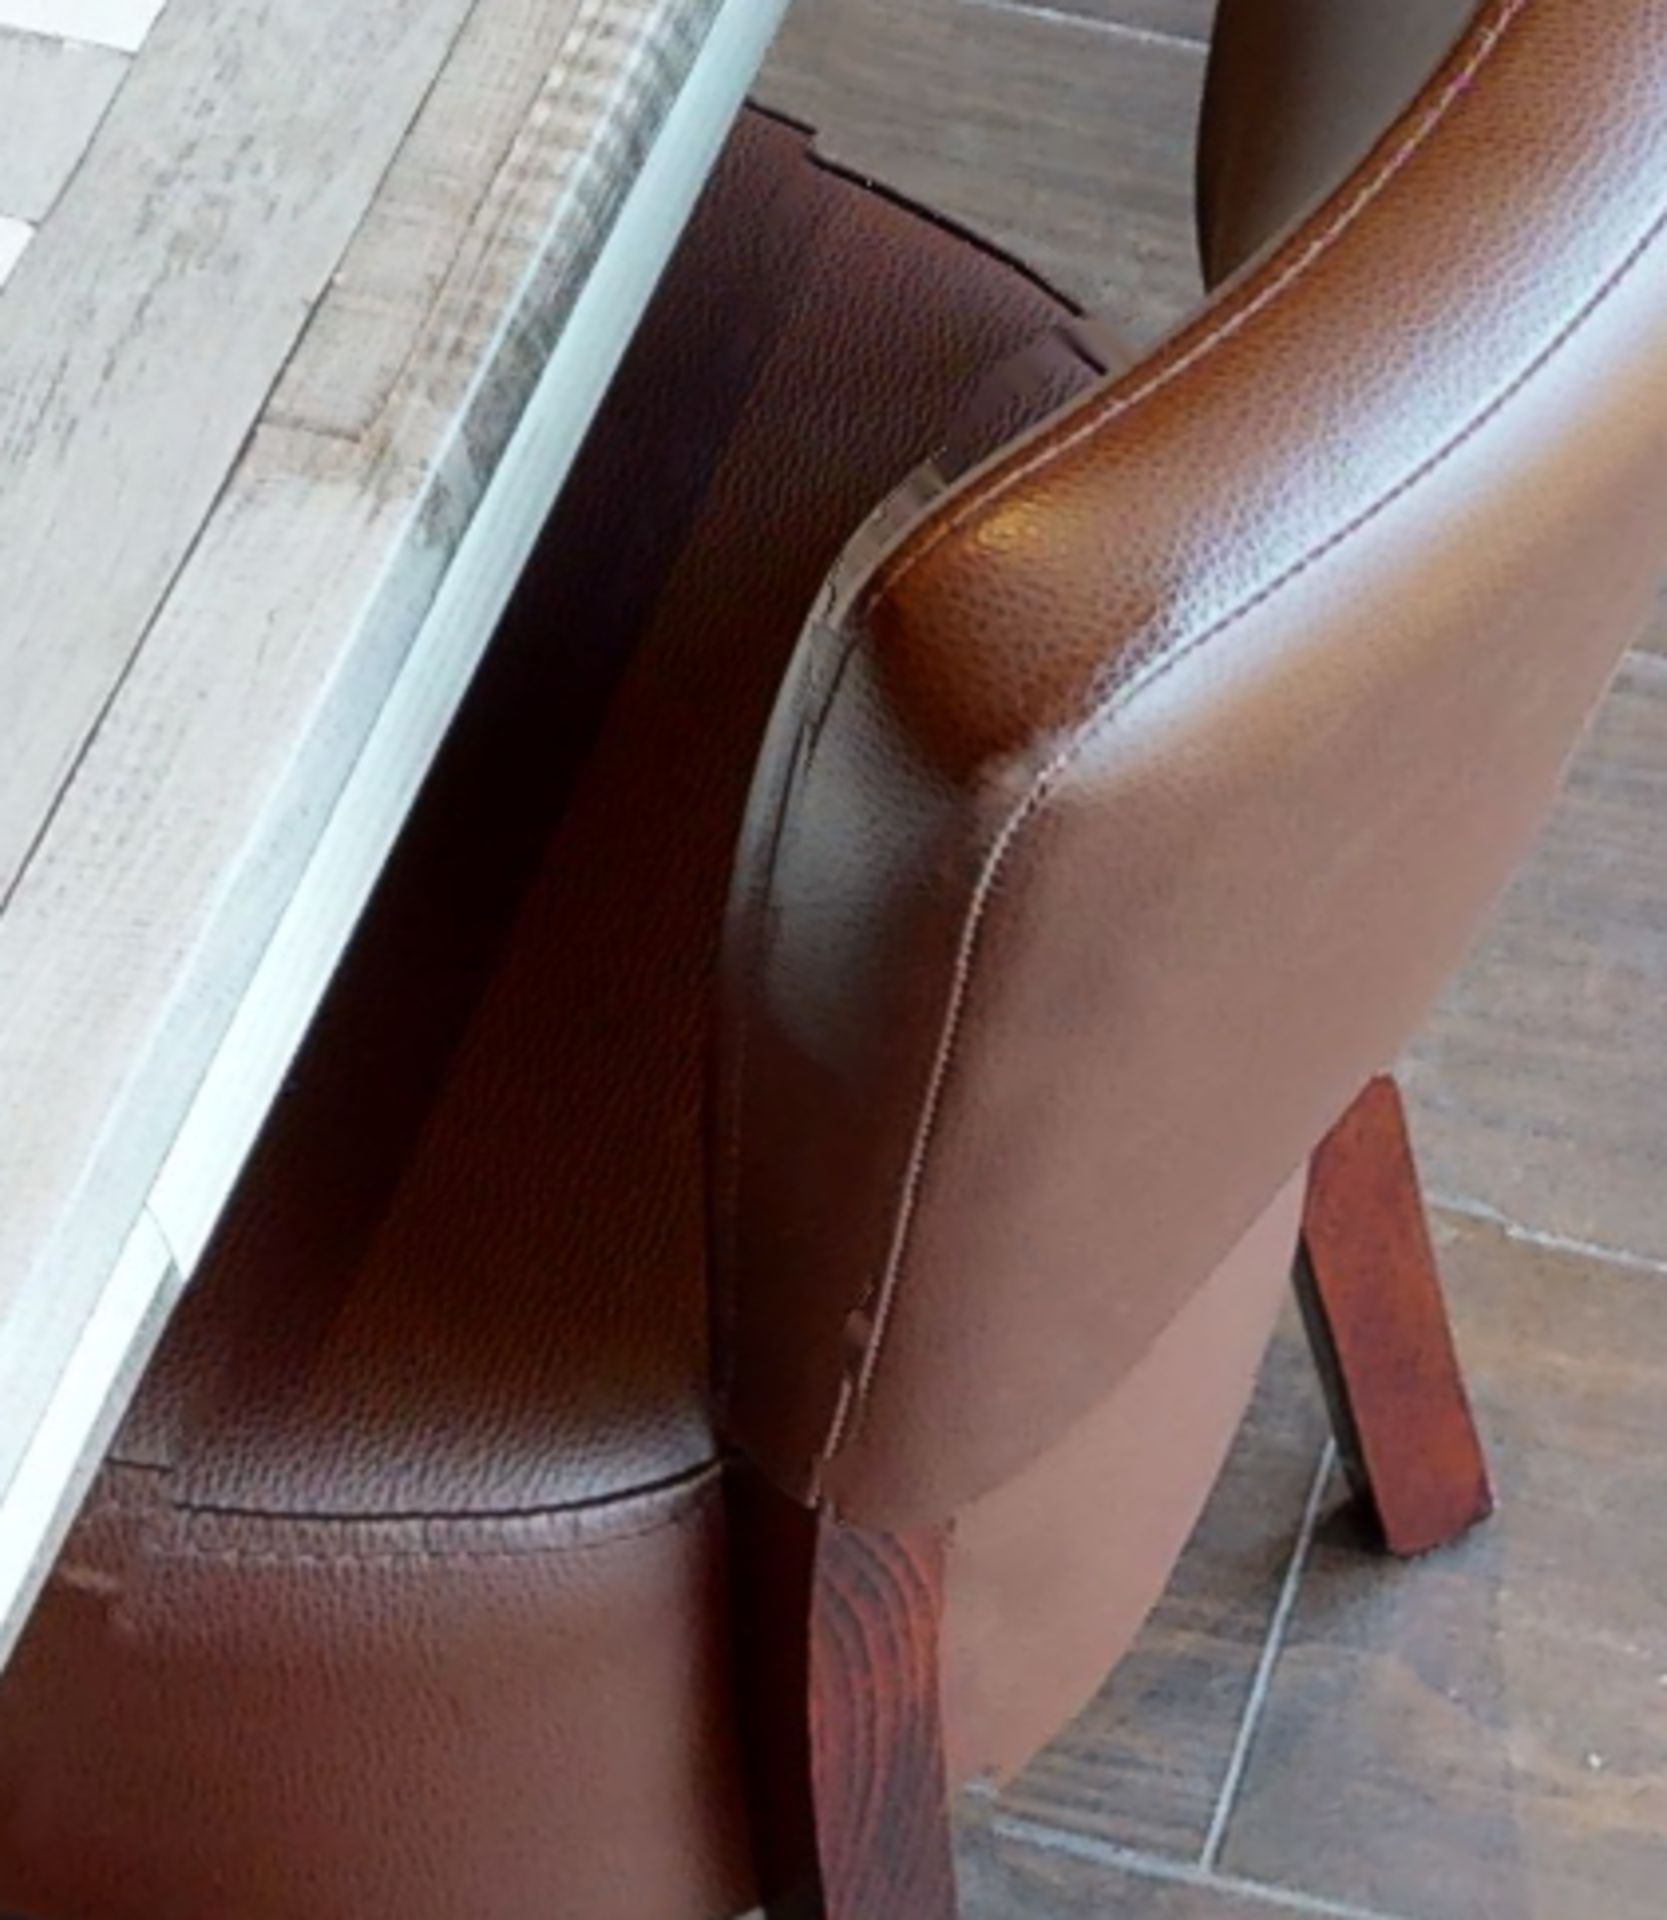 4 x Restaurant Chairs With Brown Leather Seat Pads and Padded Backrests - CL701 - Location: Ashton - Image 3 of 9